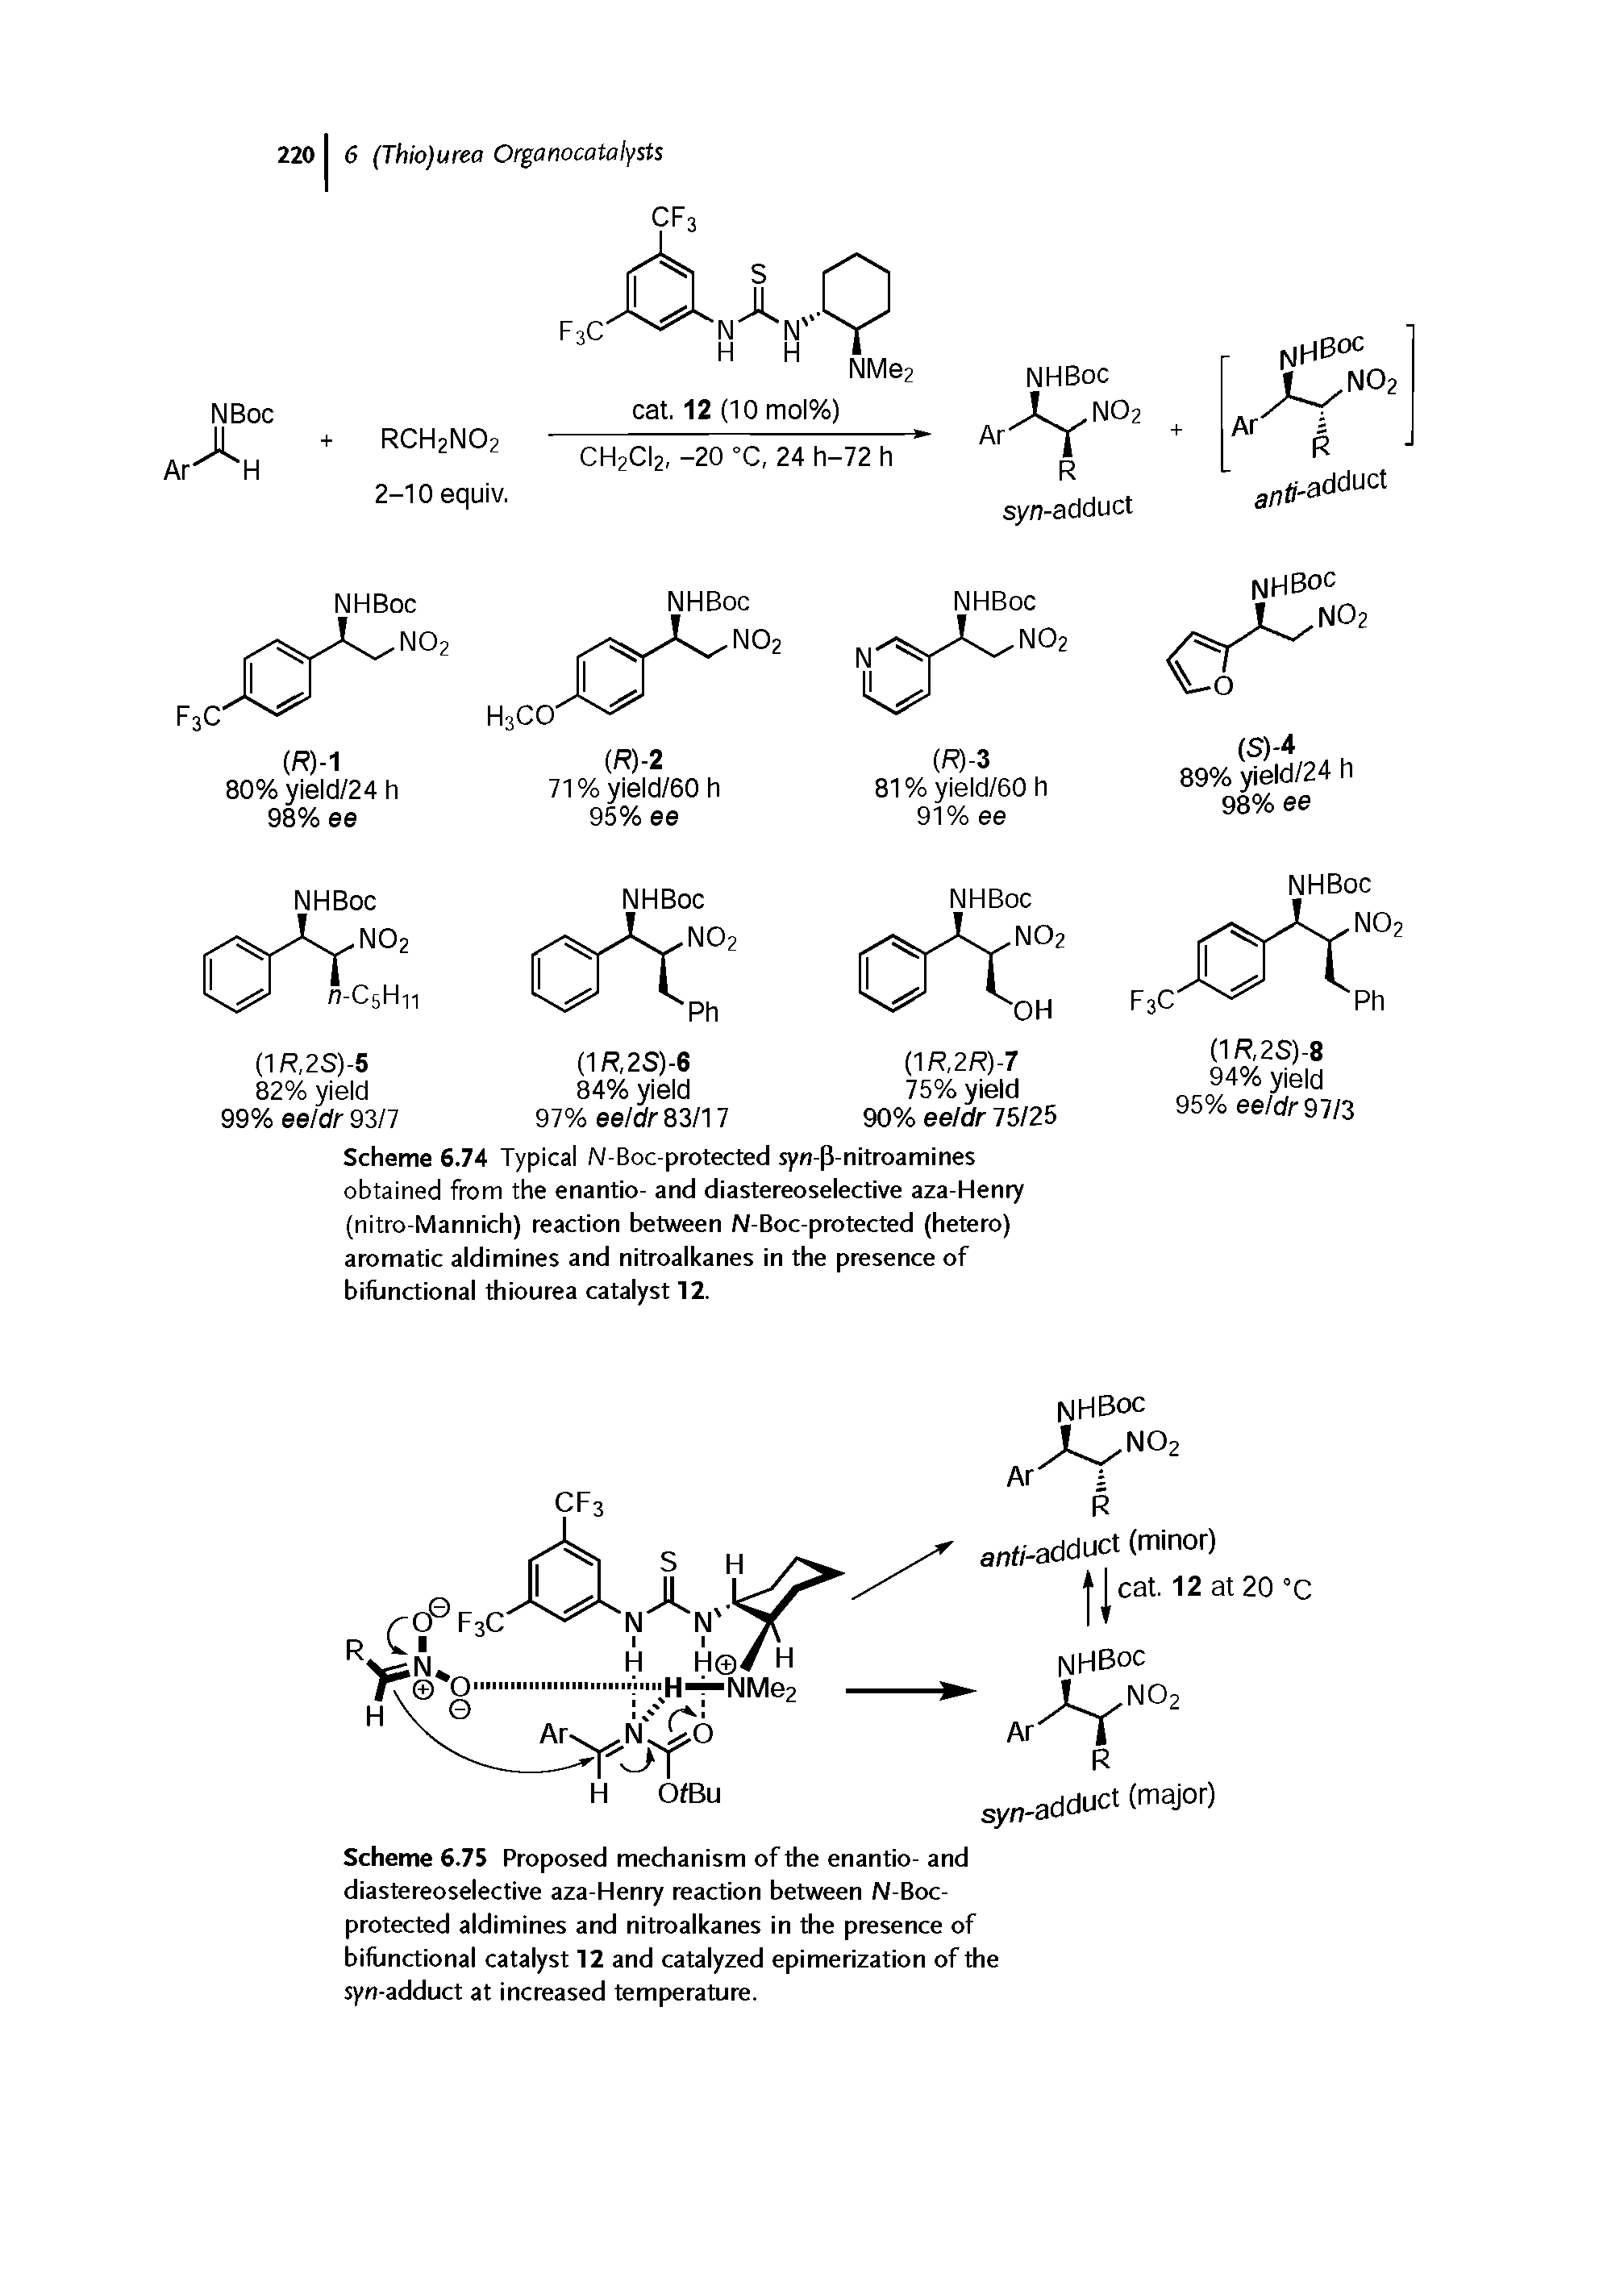 Scheme 6.75 Proposed mechanism of the enantio- and diastereoselective aza-Henry reaction between N-Boc-protected aldimines and nitroalkanes in the presence of biflinctional catalyst 12 and catalyzed epimerization of the syn-adduct at increased temperature.